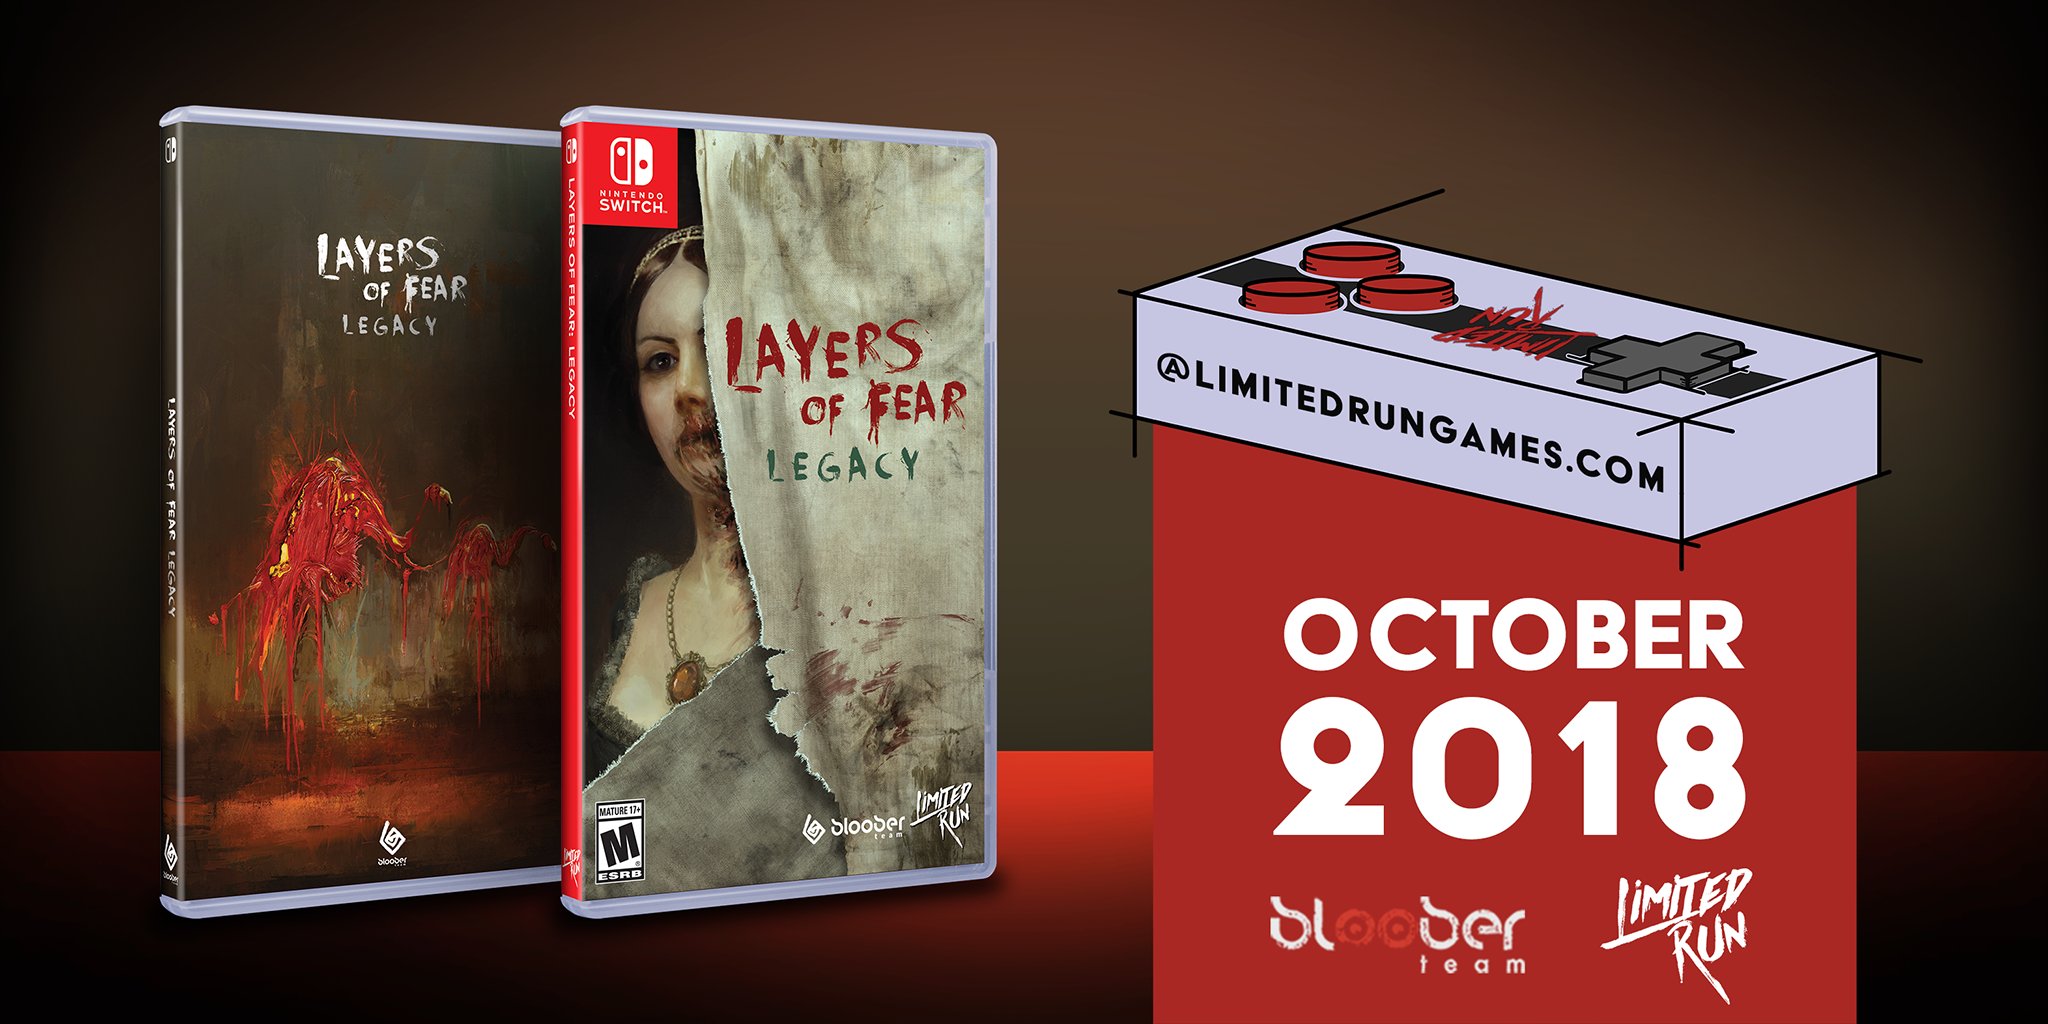 Layers of Fear: Legacy, Nintendo Switch download software, Games